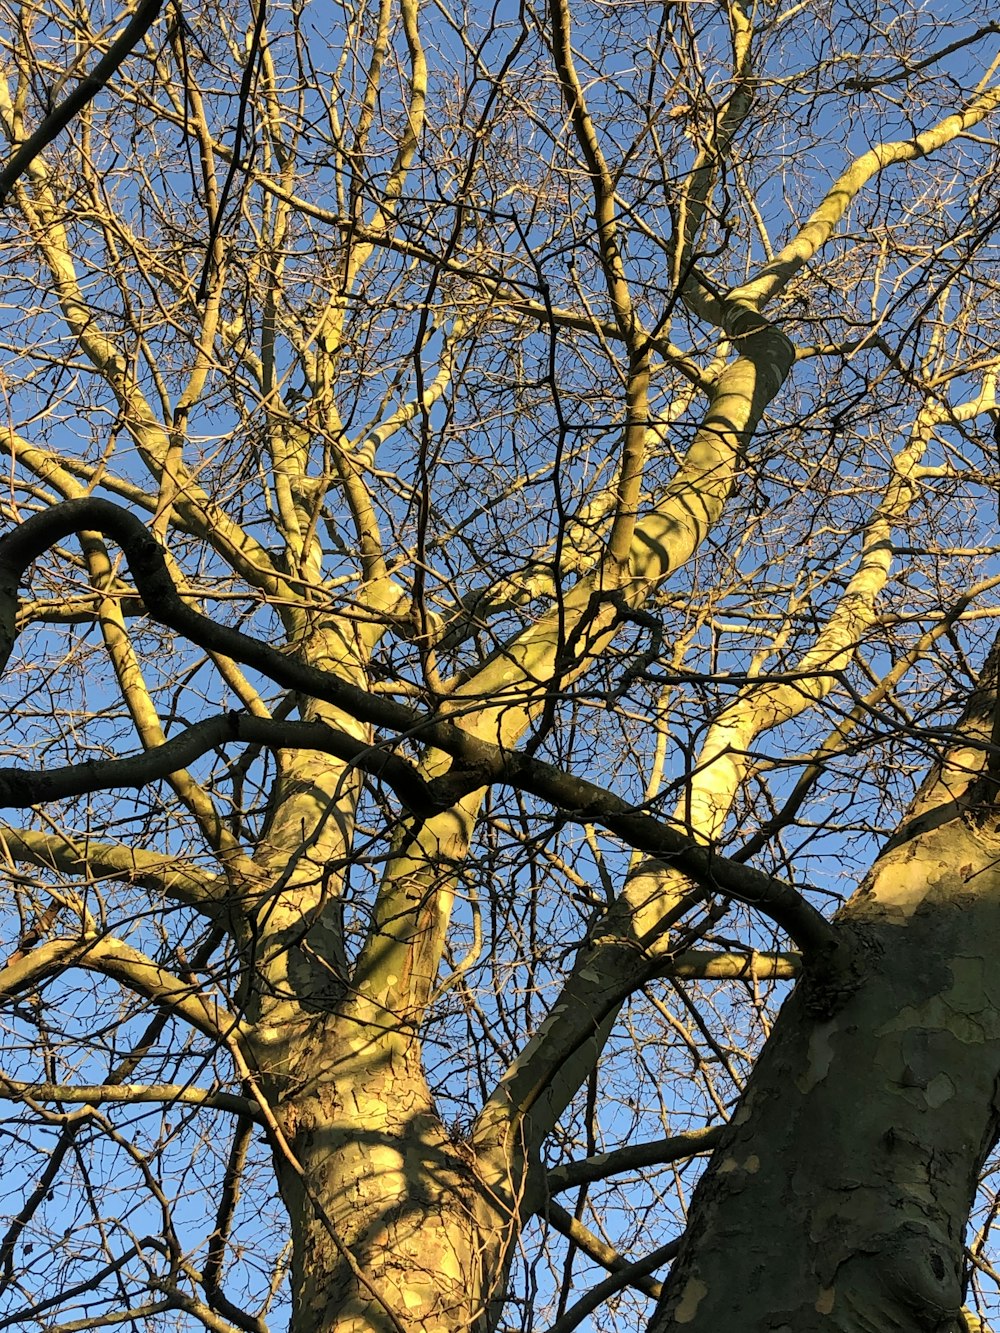 a tree with no leaves and no leaves on it